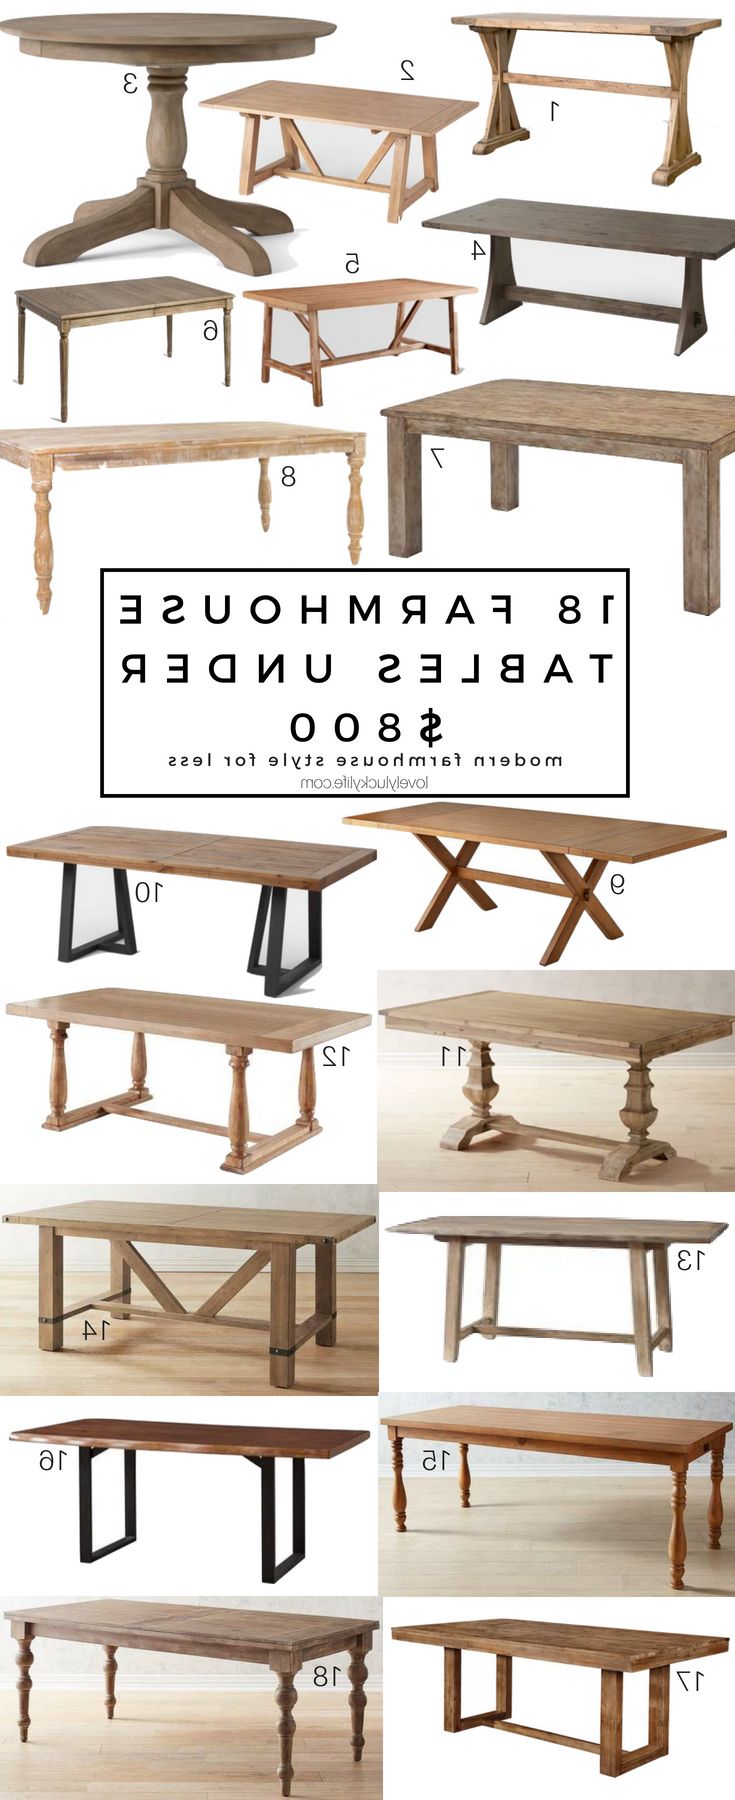 18 Of The Best Modern Farmhouse Tables Under $800 – Lovely Throughout Well Known Modern Farmhouse Extending Dining Tables (View 4 of 25)